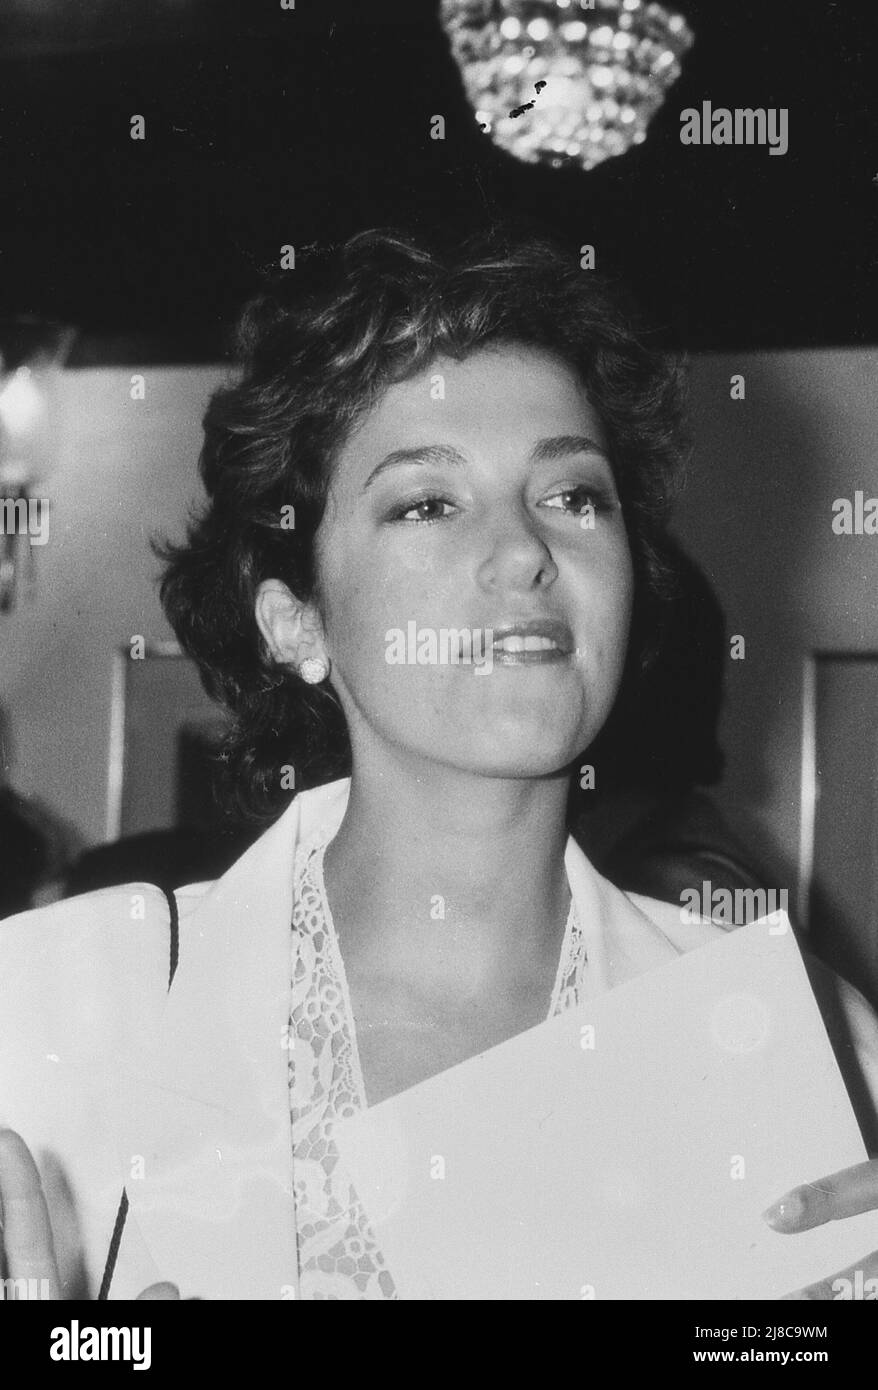 Deborah Barrymore (Moore), British actress, attends a celebrity event in London on May 27, 1989. She is the daughter of actor Roger Moore. Stock Photo